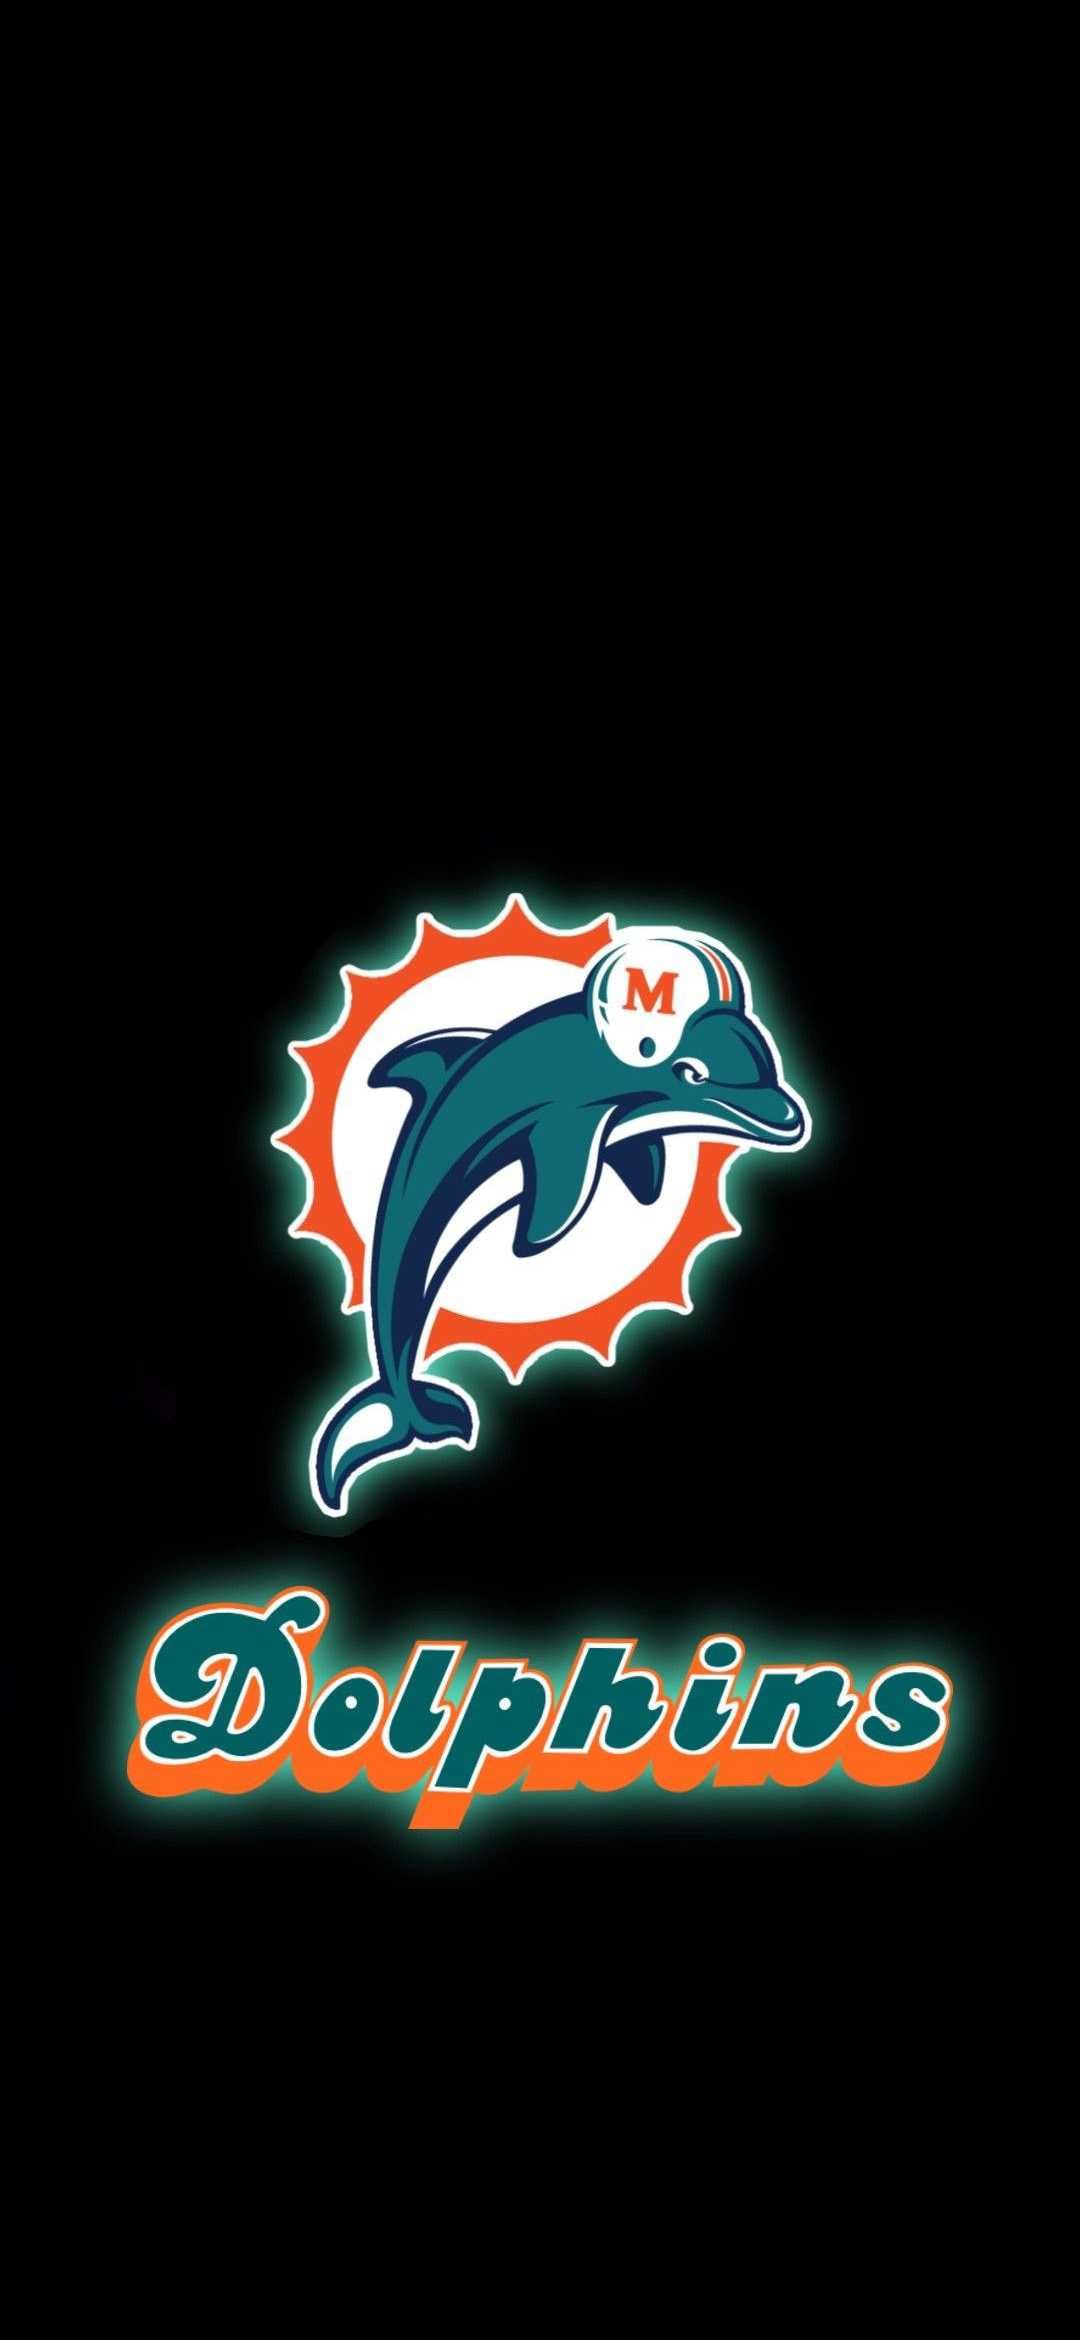 Miami Dolphins Wallpaper Discover more American Football, Dolphins, Miami Dolphins, NFL wallpaper.. Miami dolphins wallpaper, Miami dolphins logo, Miami dolphins